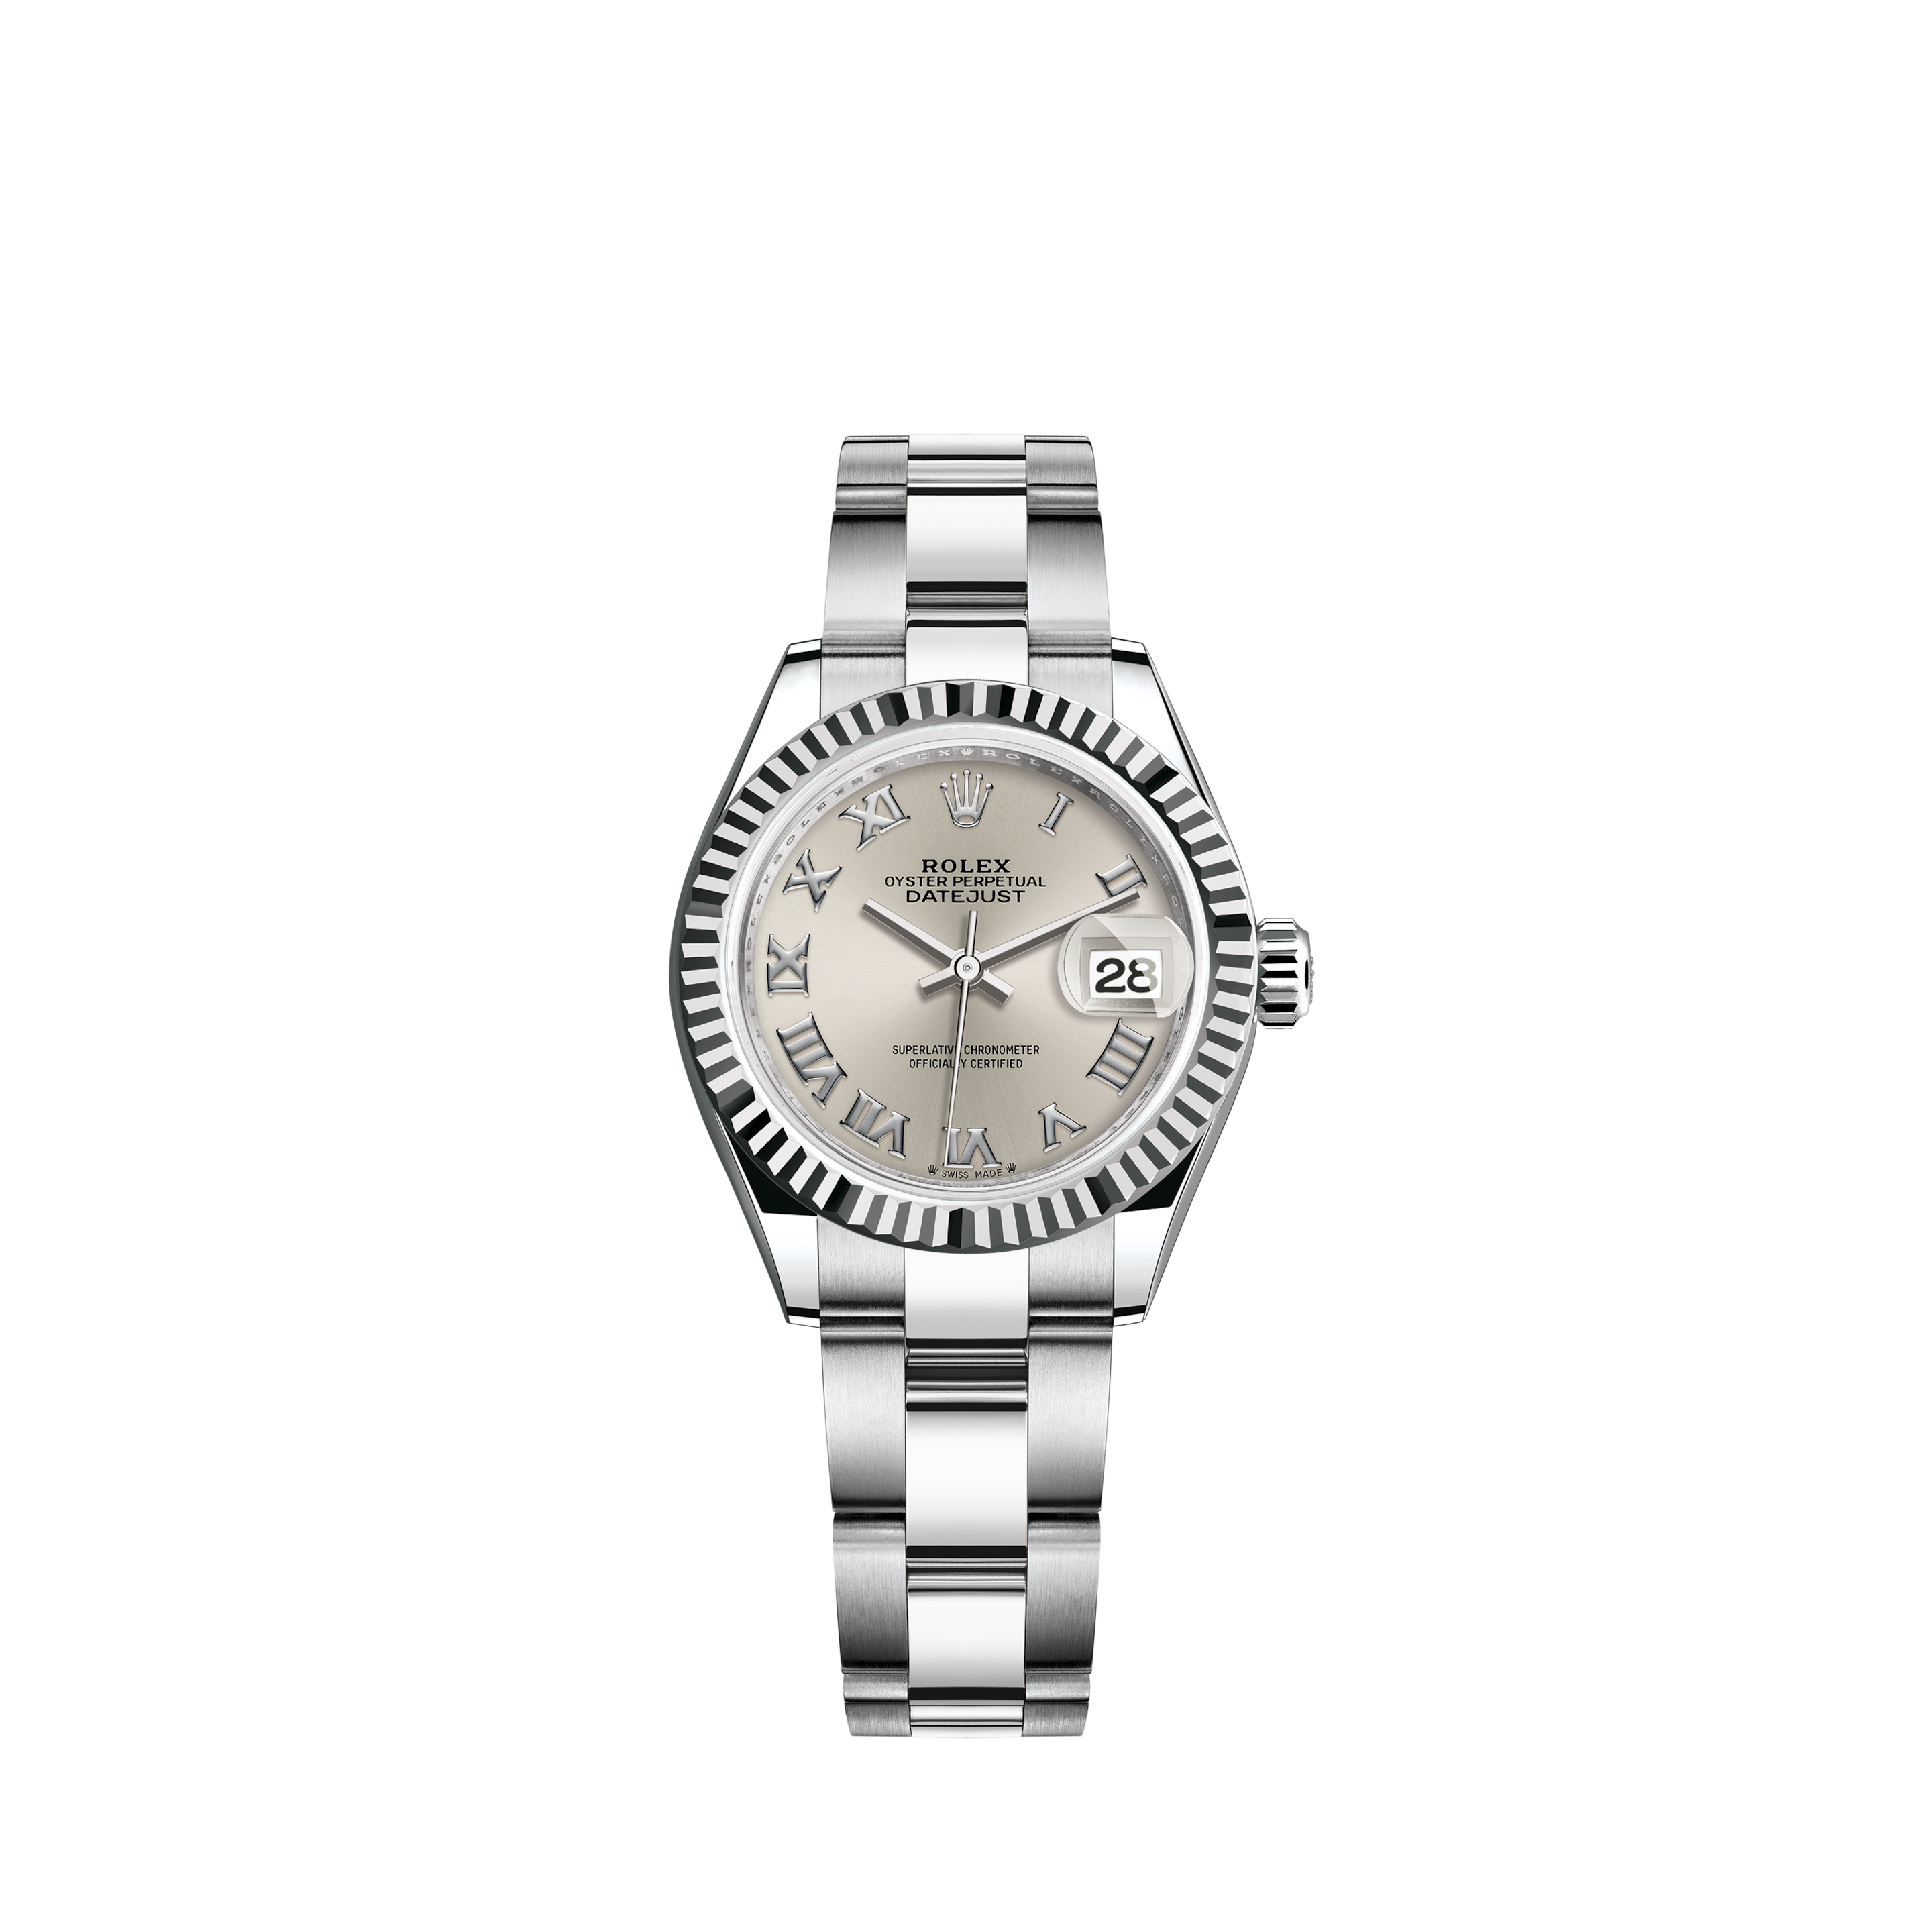 Rolex Lady-Datejust 26 Chocolate／Brown dial 